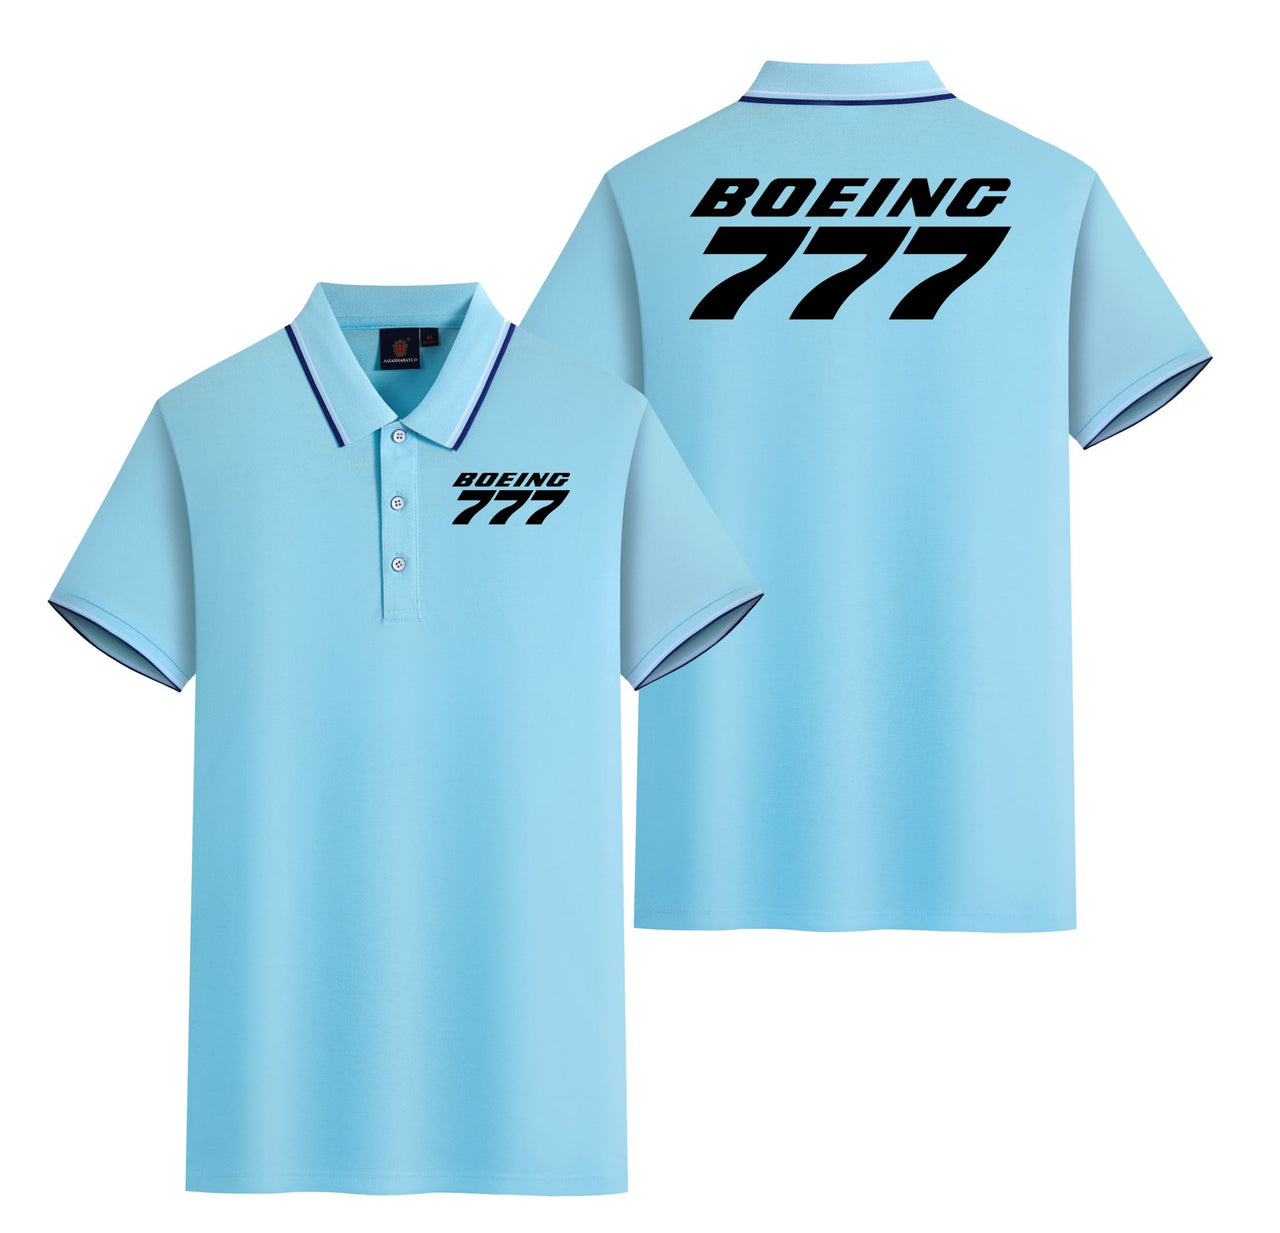 Boeing 777 & Text Designed Stylish Polo T-Shirts (Double-Side)